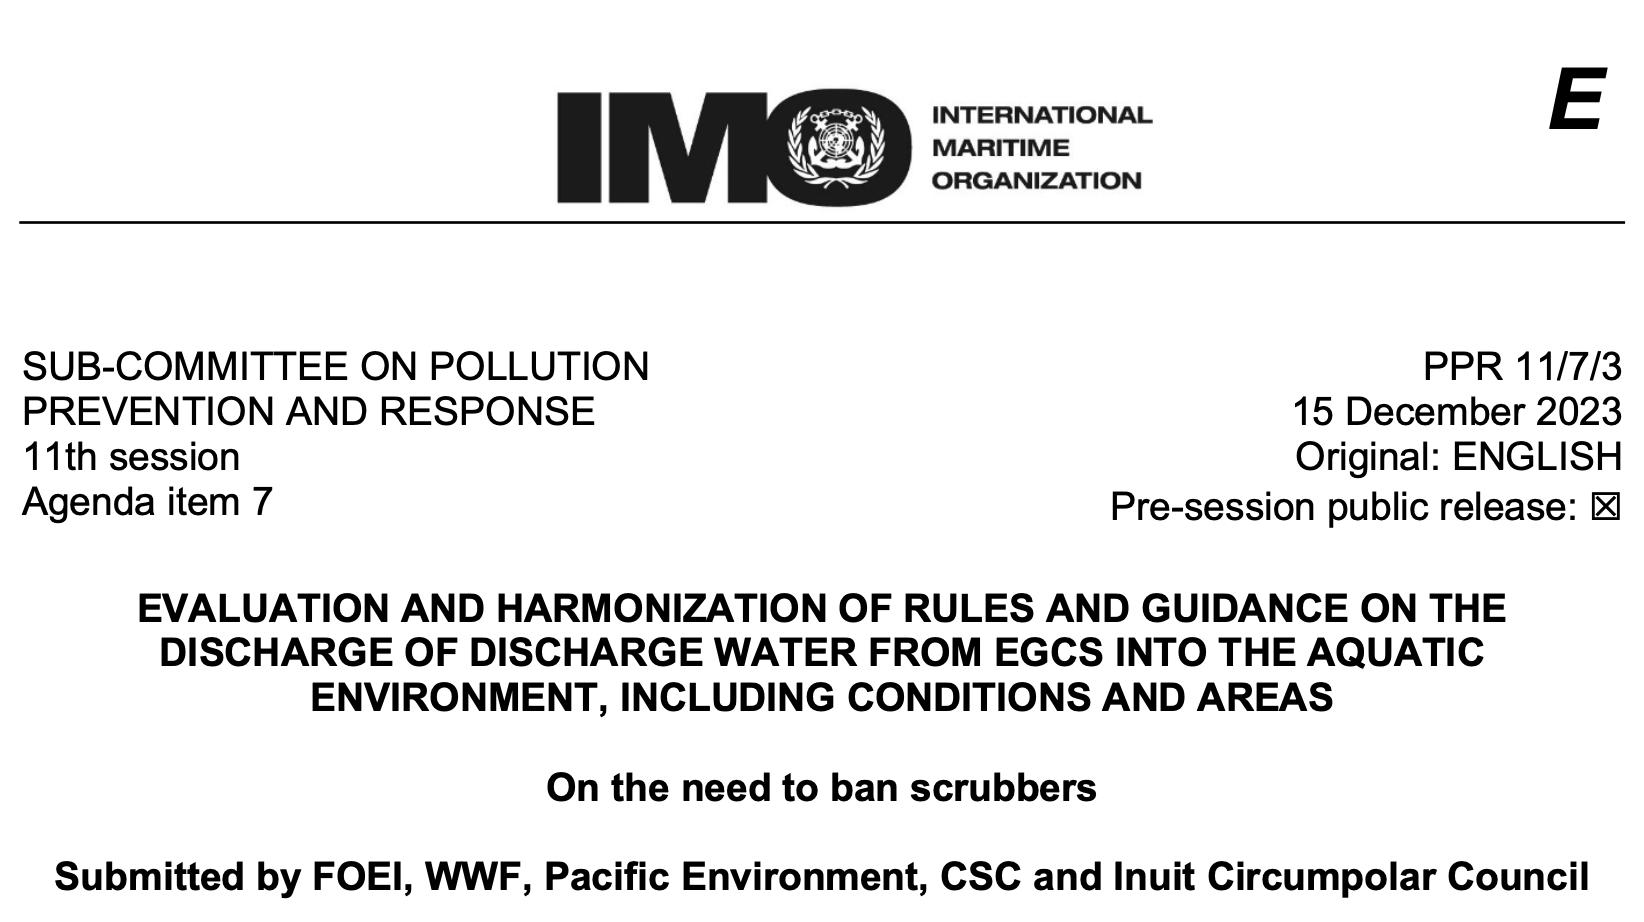 PPR 11-7-3 - On the need to ban scrubbers (FOEI, WWF, Pacific Enviro...)